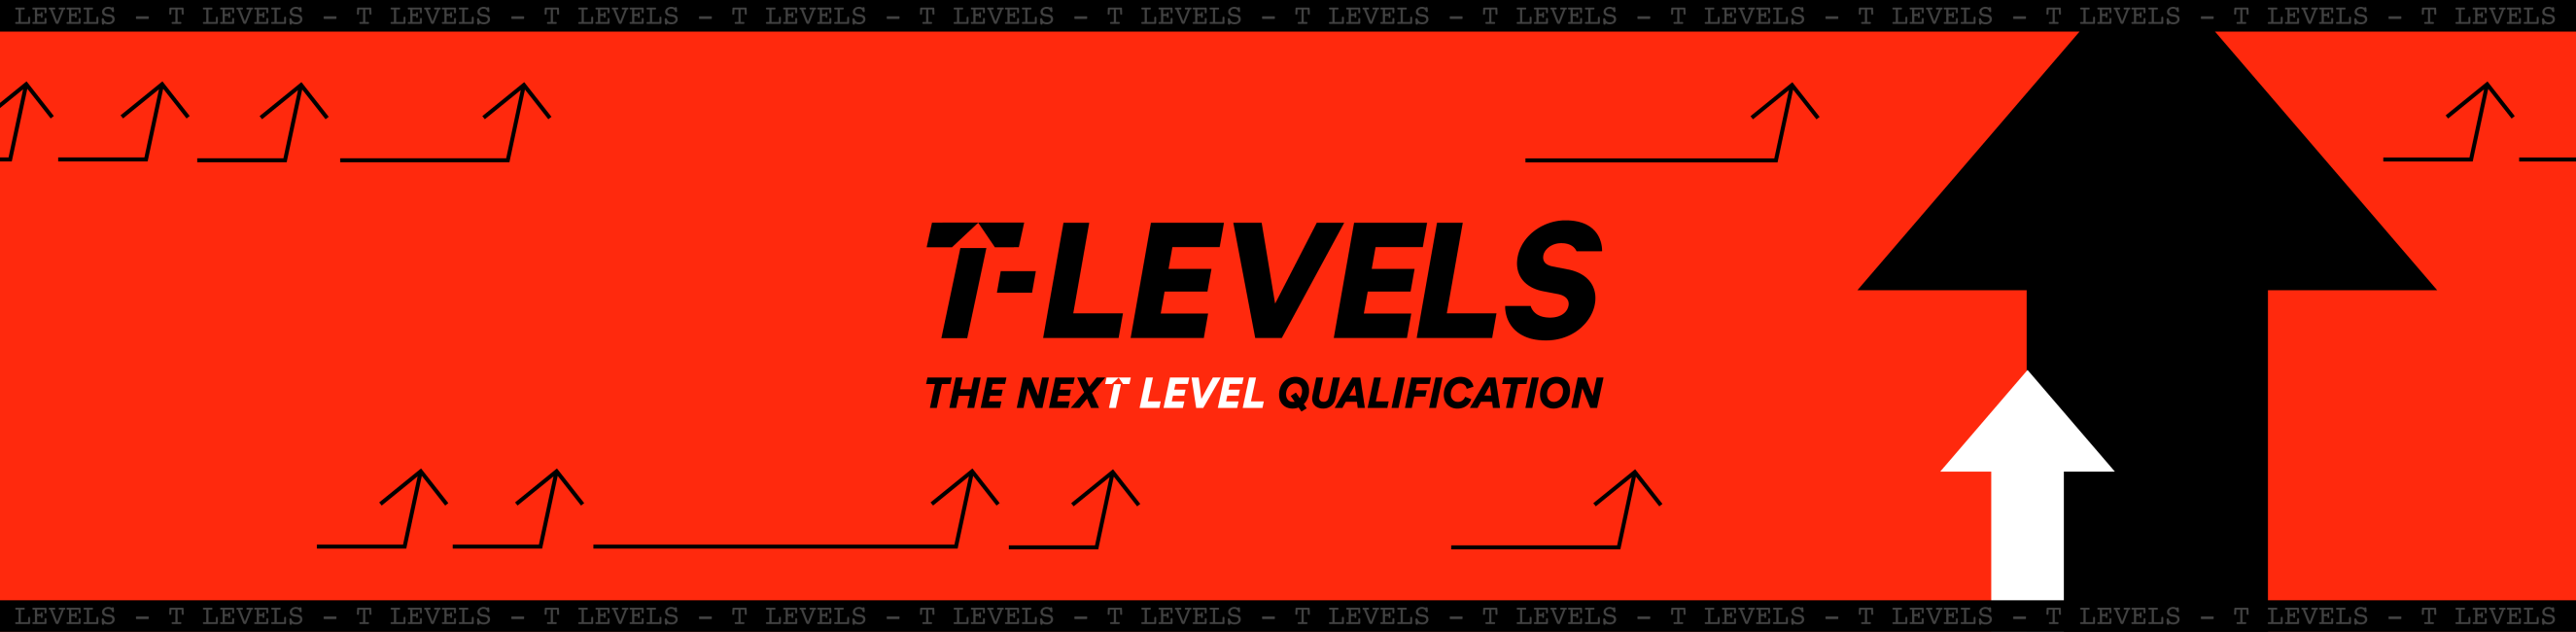 T Level - the Next Level Qualification header